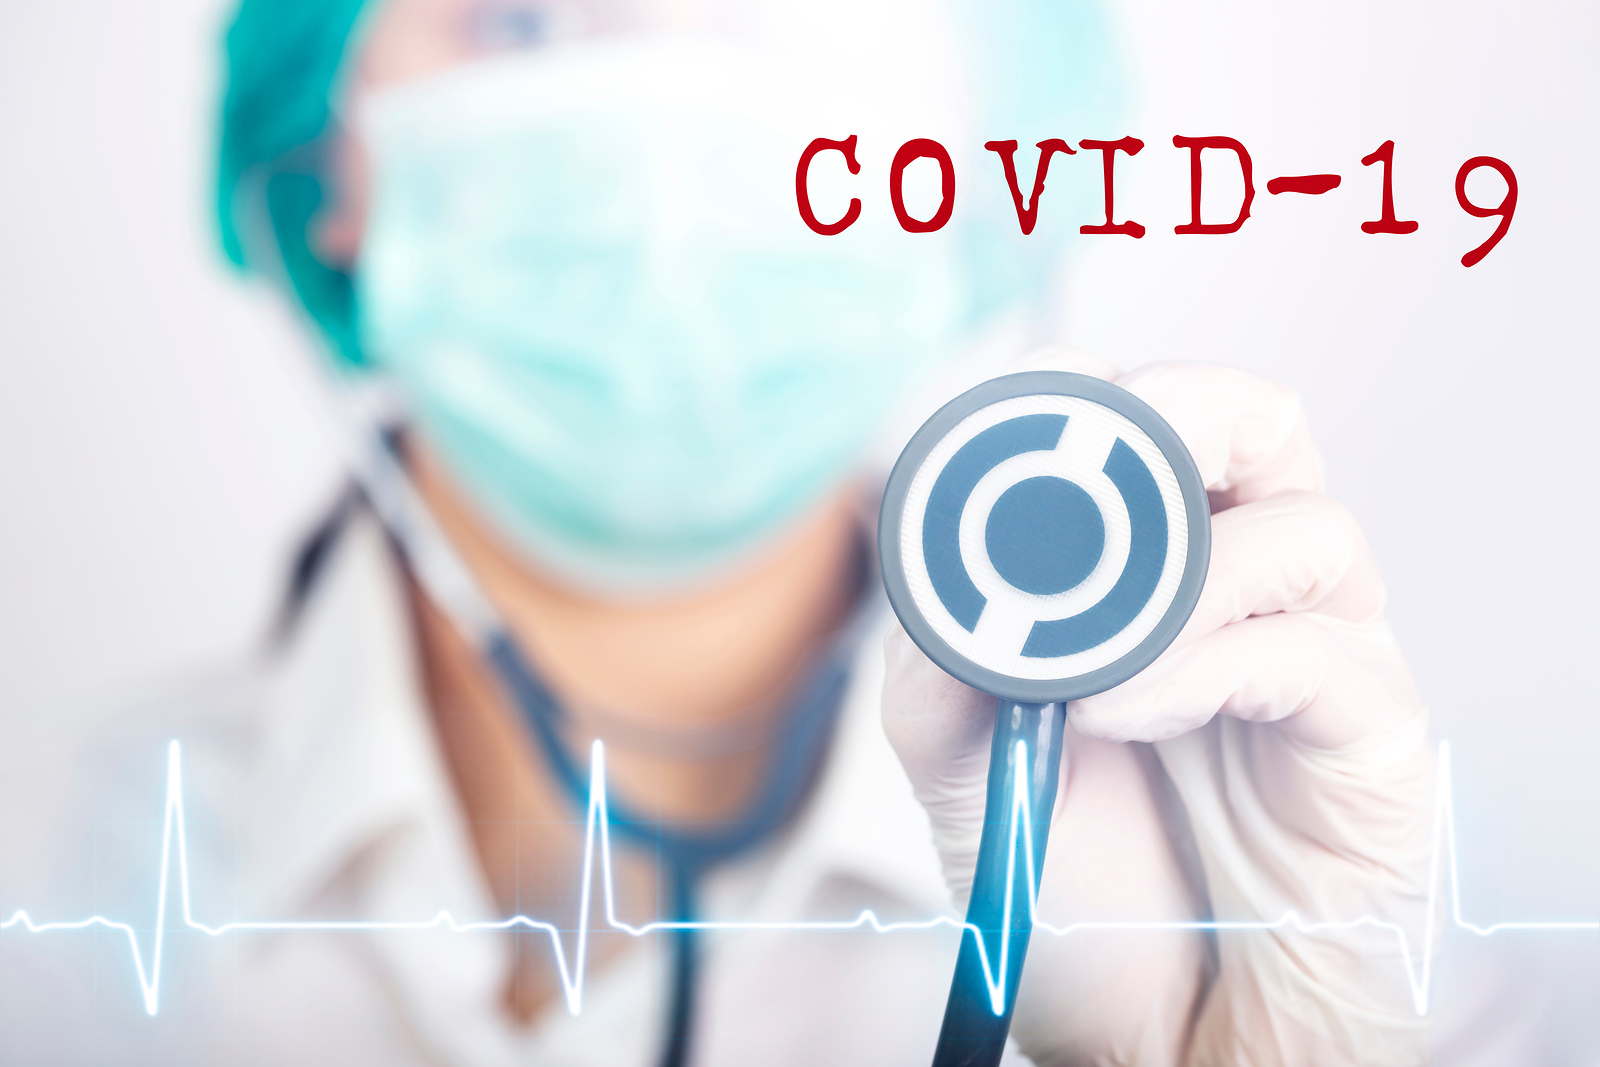 Medical Bills During COVID-19: A Review of Waived Costs and Expanded Benefits